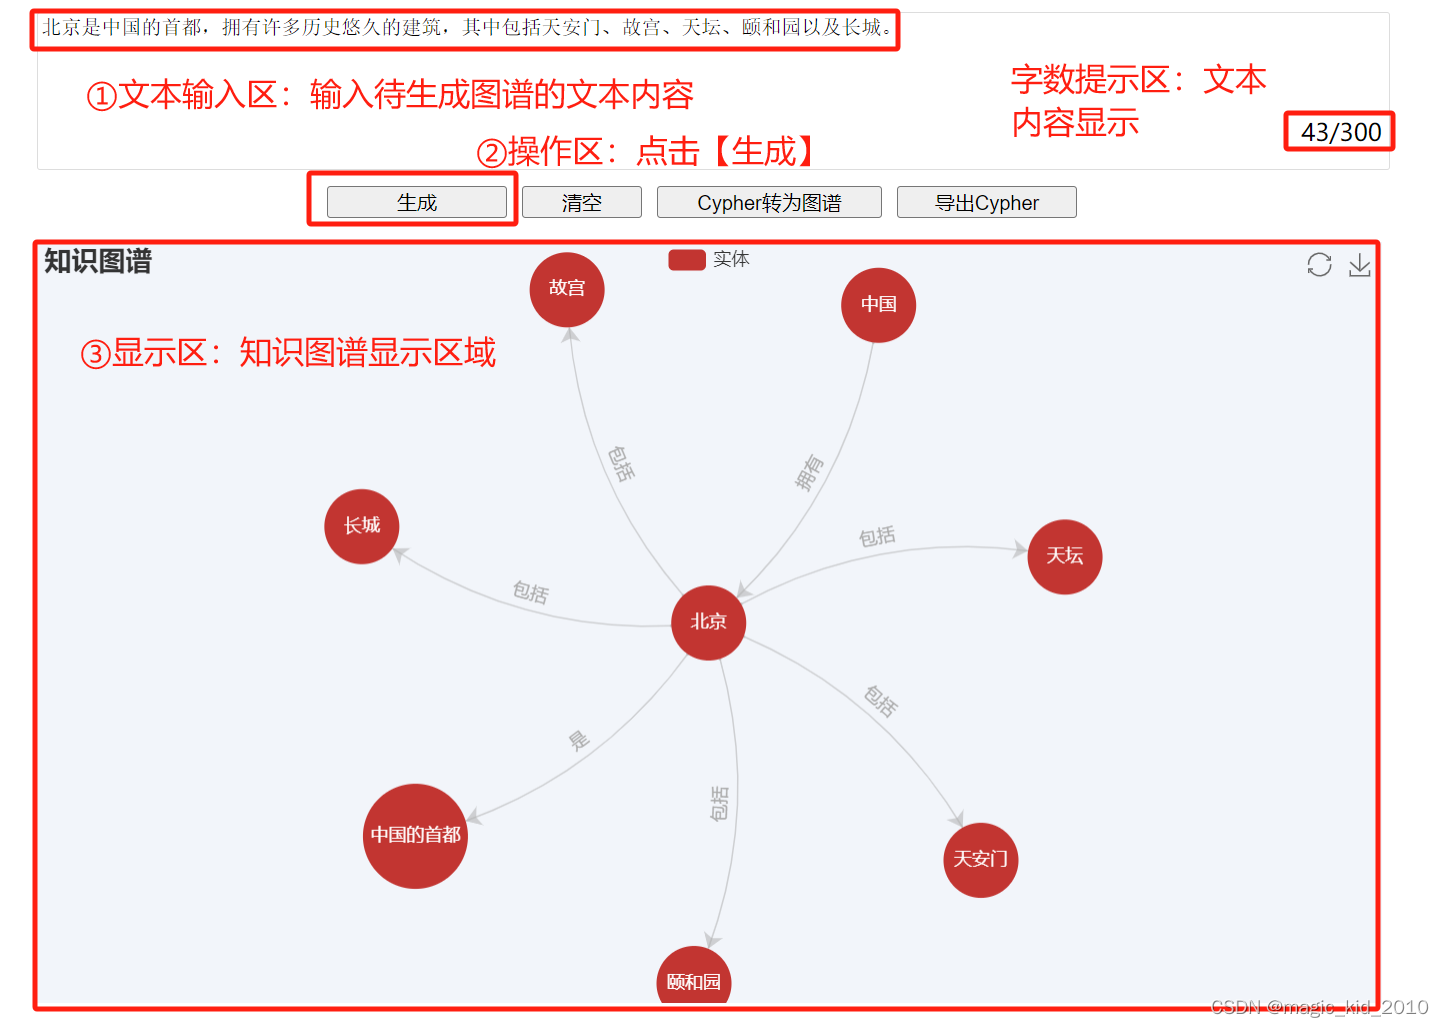 <span style='color:red;'>图</span><span style='color:red;'>数据库</span> 之 Neo4j <span style='color:red;'>与</span> AI 大模型<span style='color:red;'>的</span>结合绘制<span style='color:red;'>知识</span><span style='color:red;'>图谱</span>